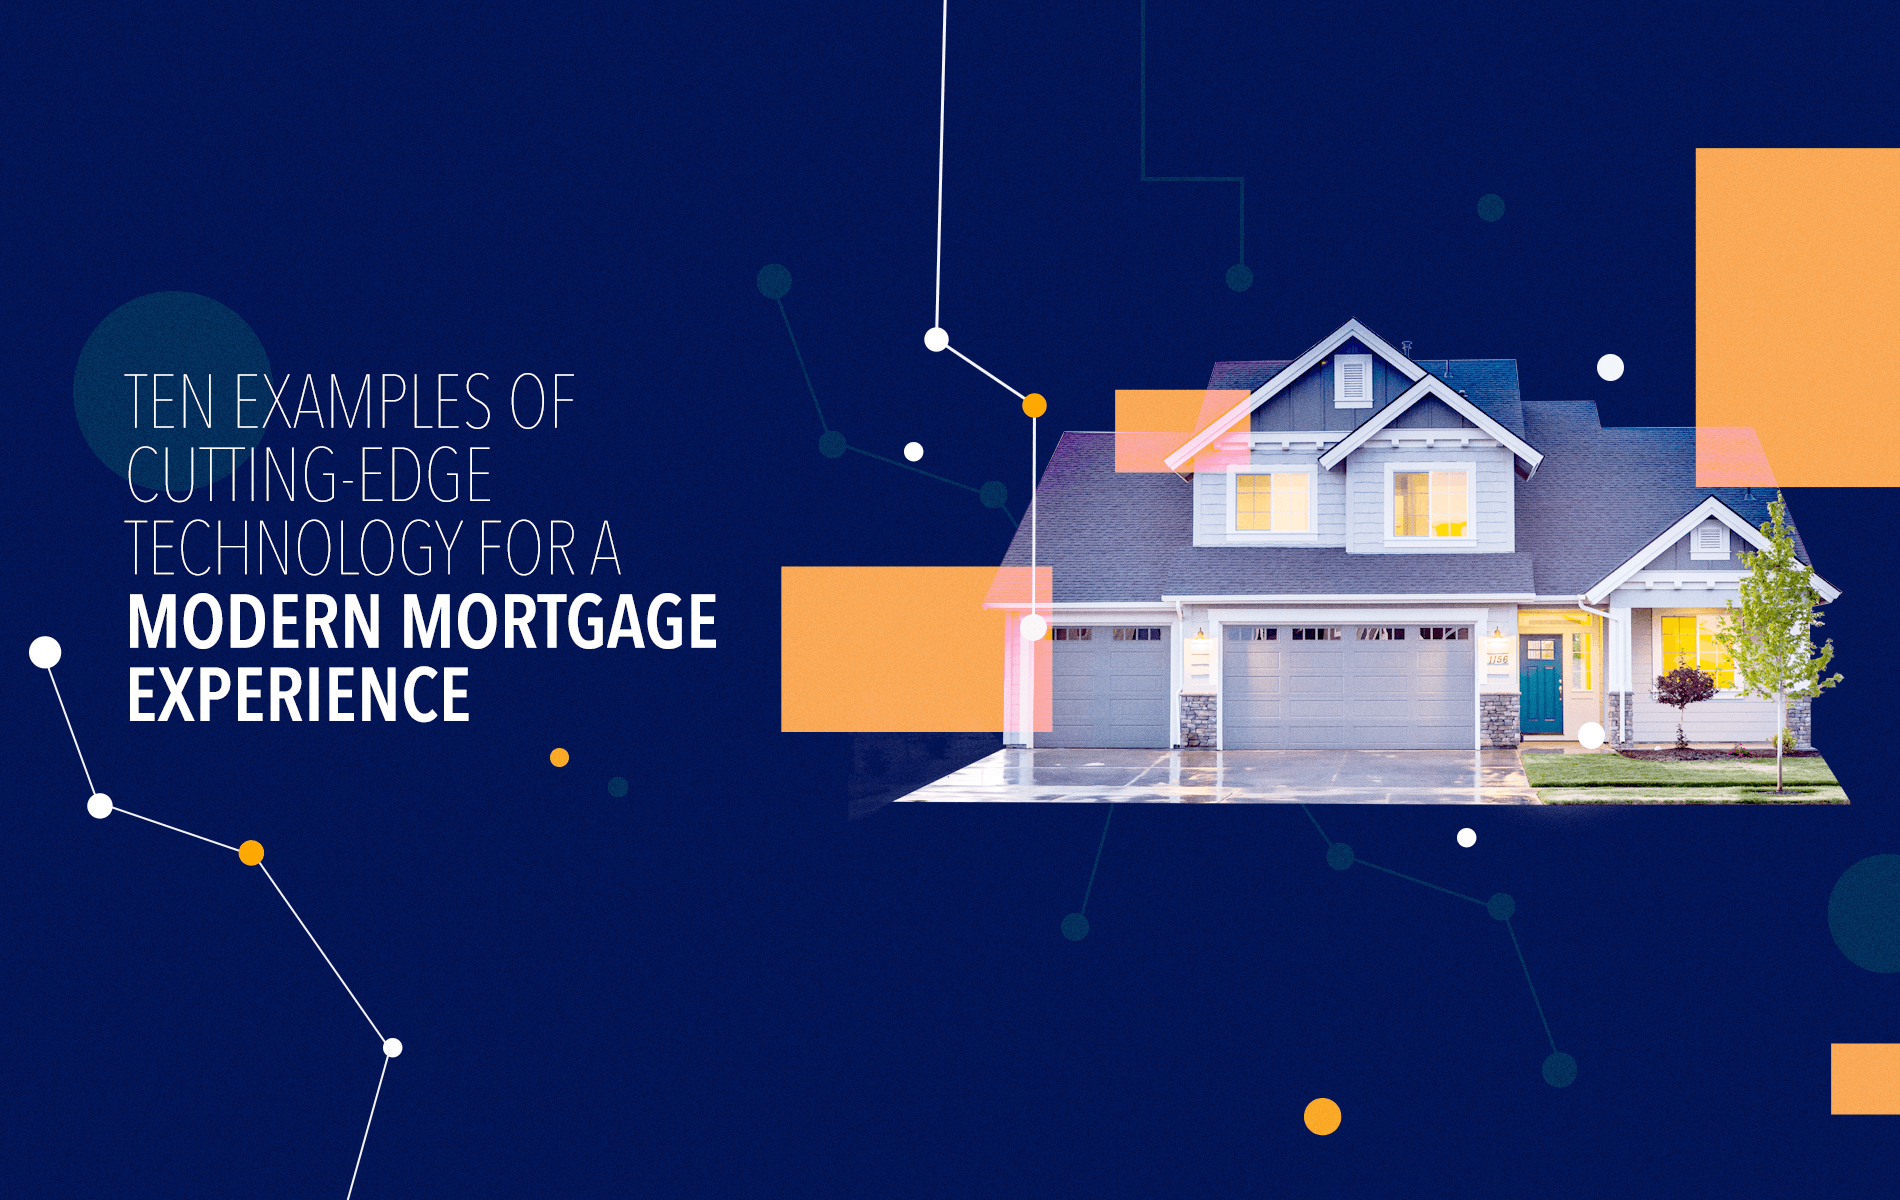 Image of a home, abstract shapes/lines, and text that reads "ten examples of cutting-edge technology for a modern mortgage experience"